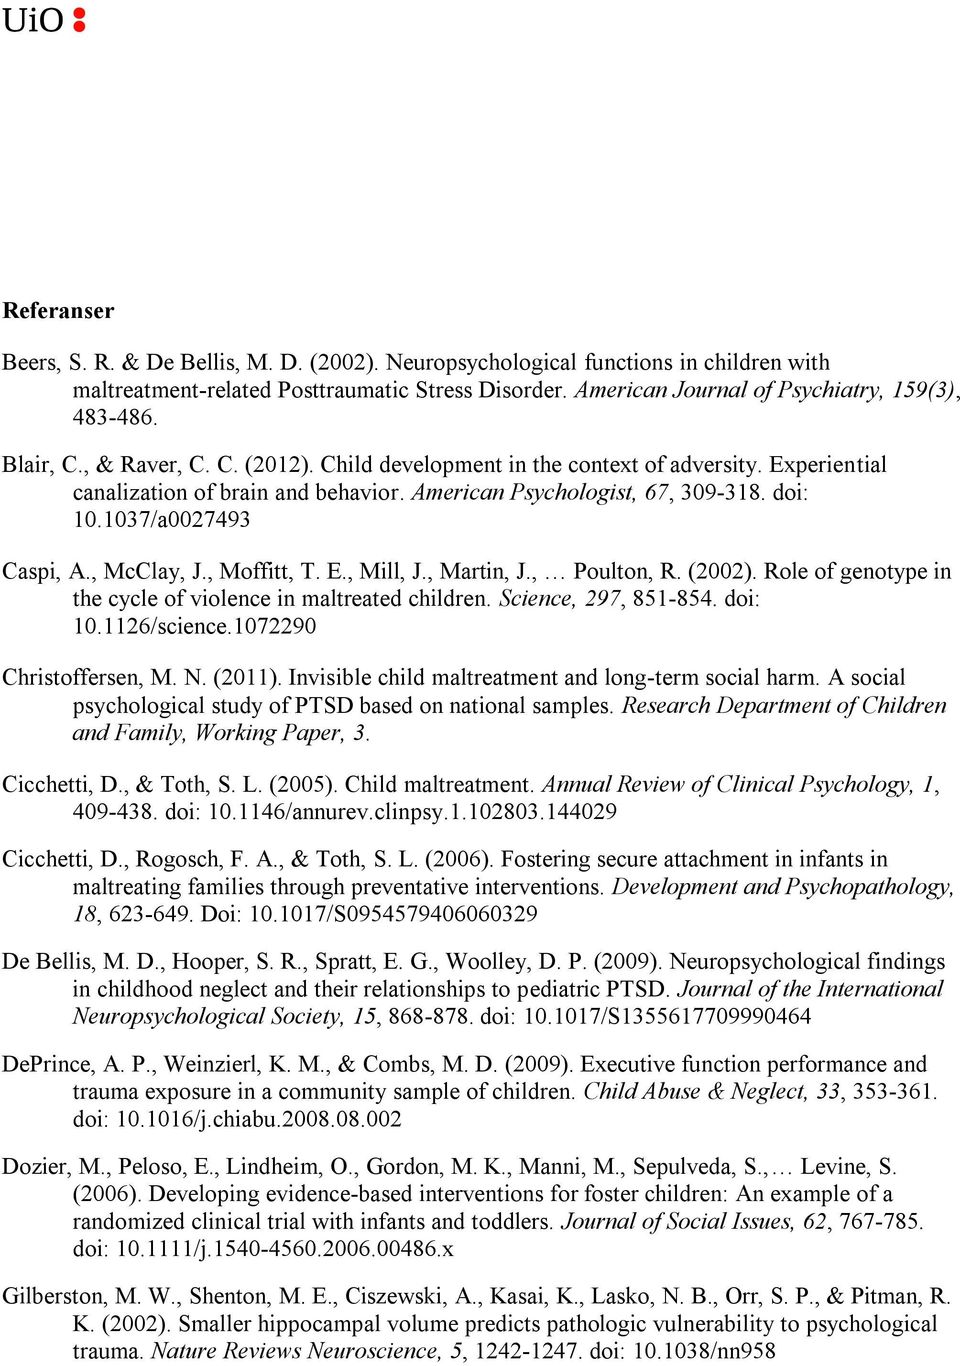 , McClay, J., Moffitt, T. E., Mill, J., Martin, J., Poulton, R. (2002). Role of genotype in the cycle of violence in maltreated children. Science, 297, 851-854. doi: 10.1126/science.